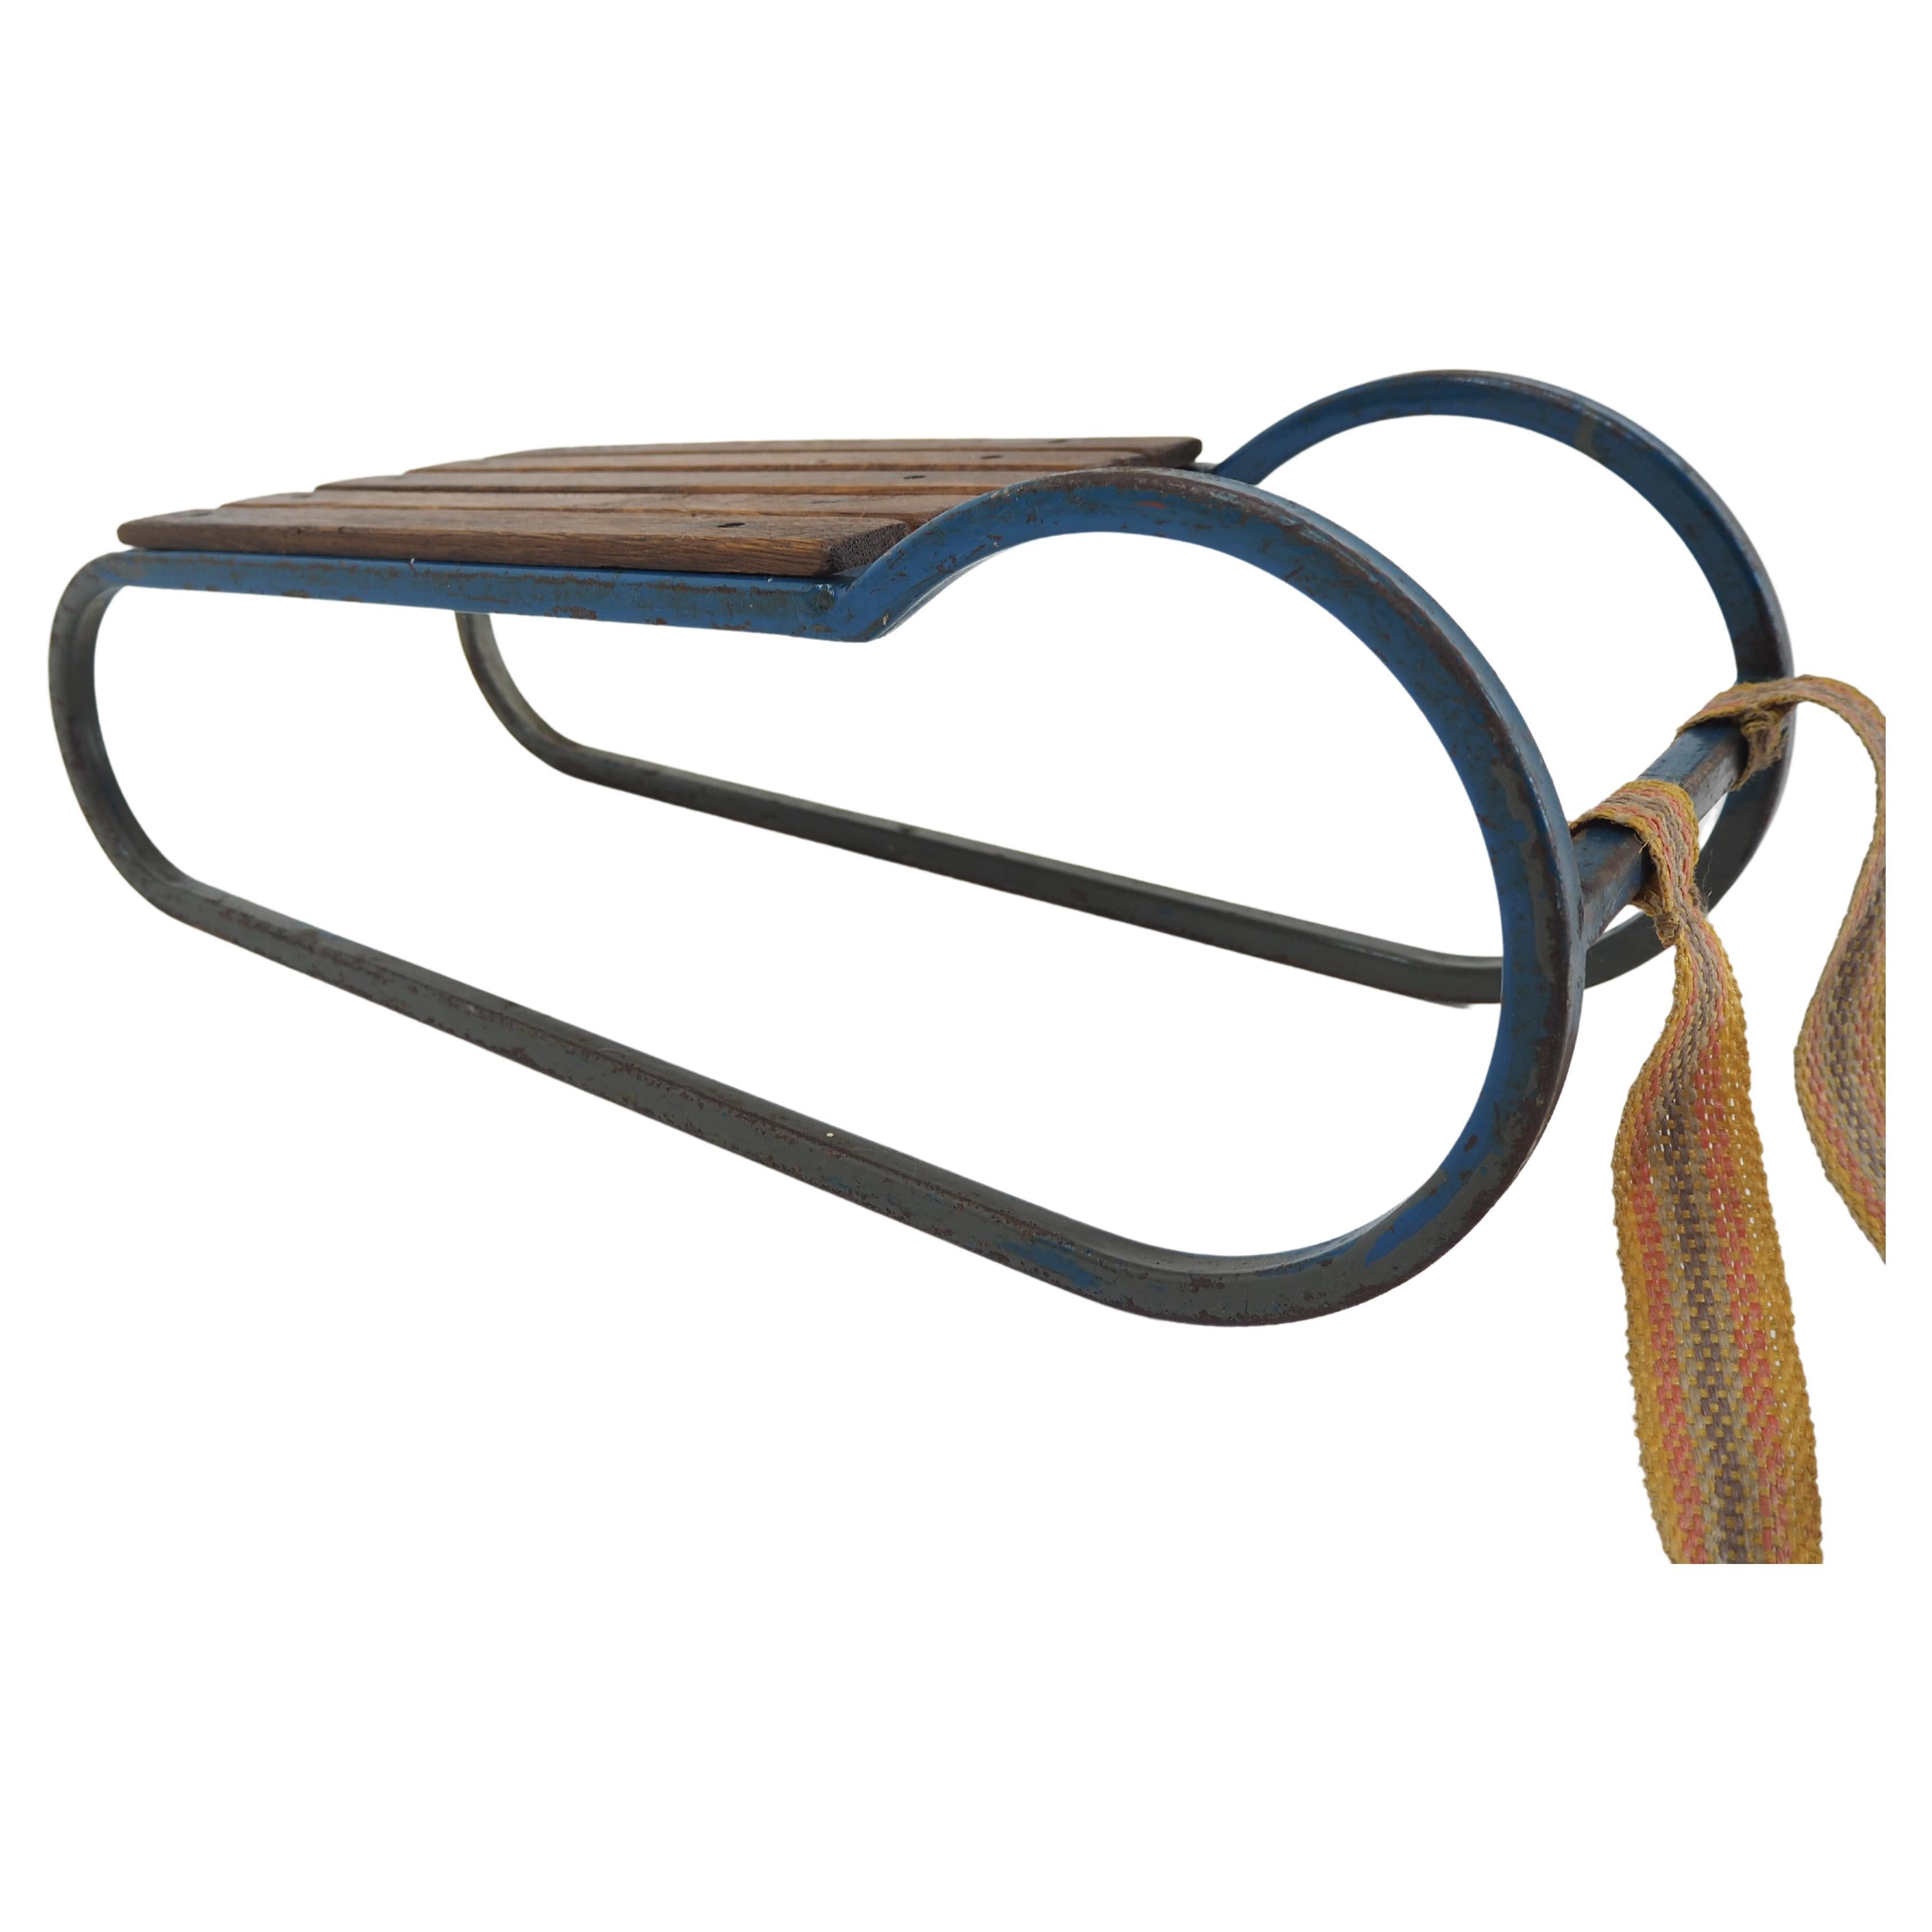 Early 20th Century Steel and Wood Kids Toboggan, Europe For Sale